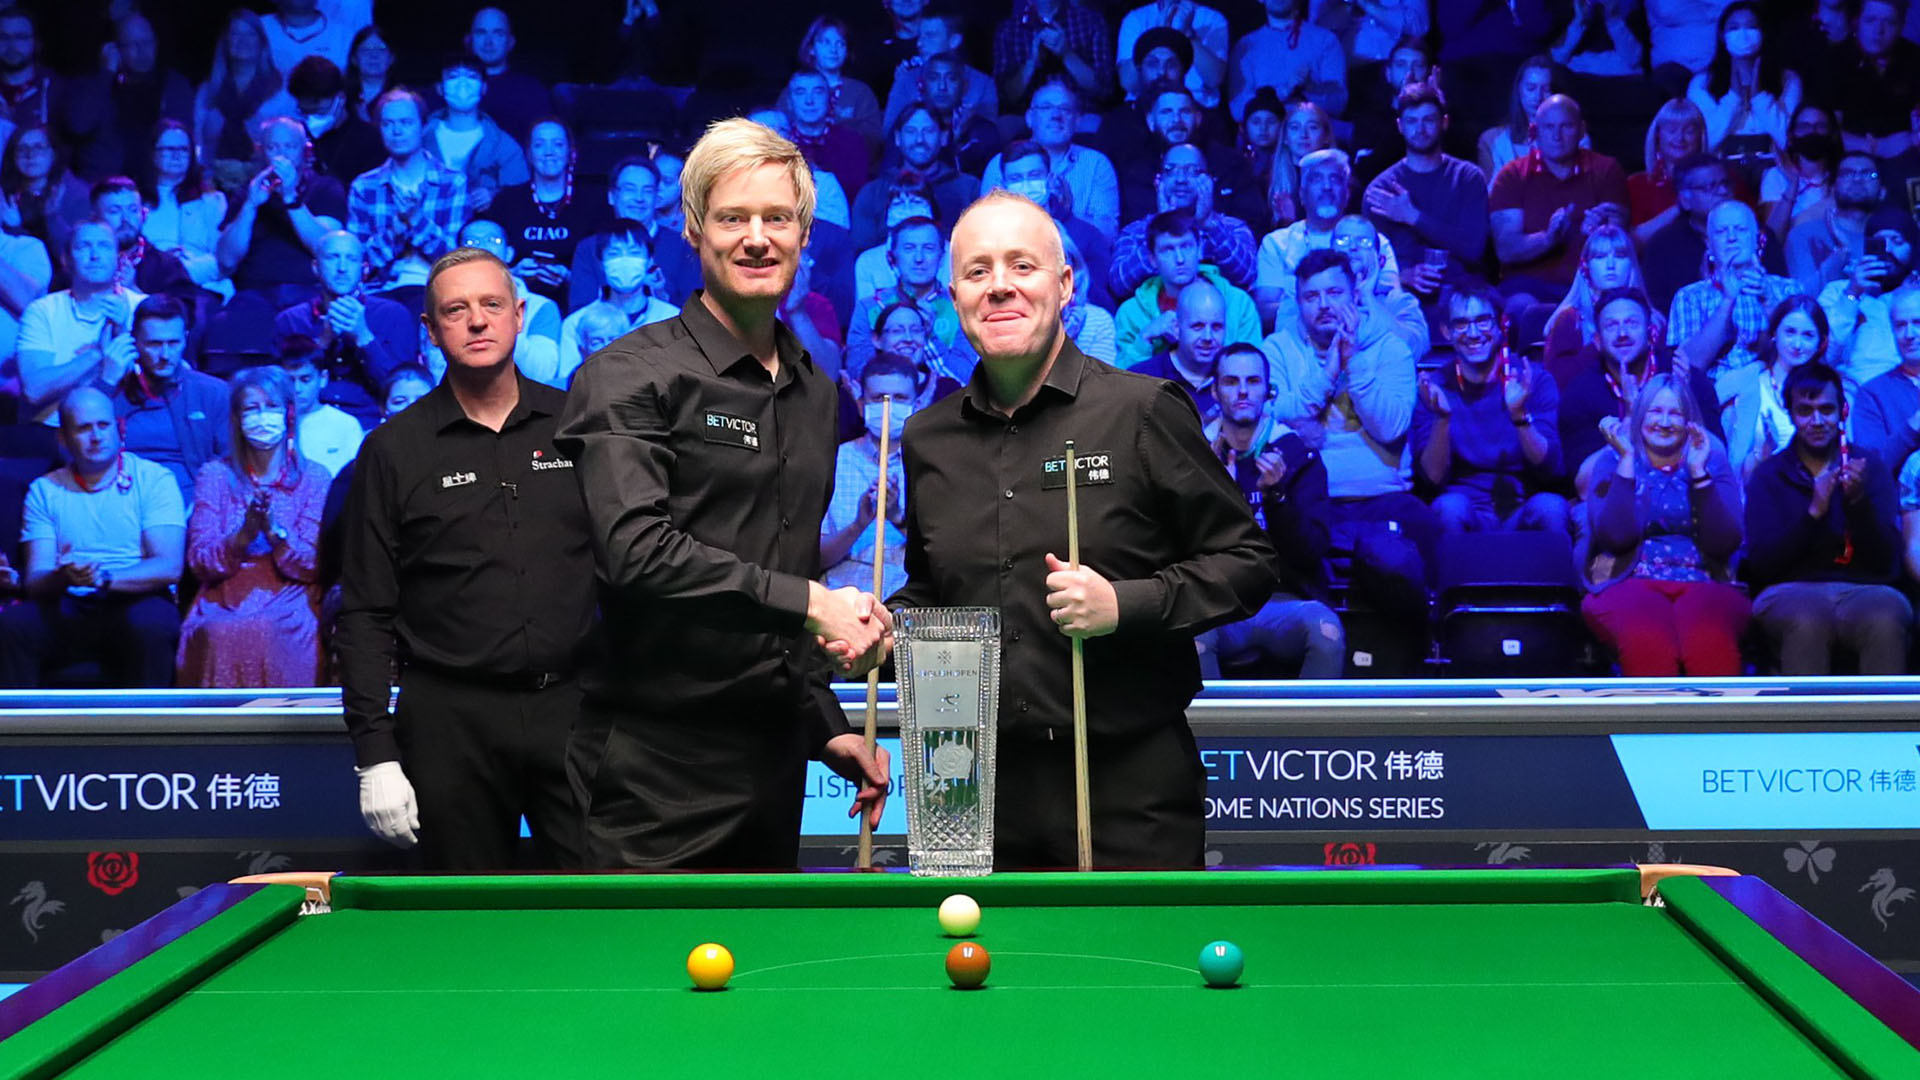 Snooker results Neil Robertson atones for last year by winning epic final 9-8